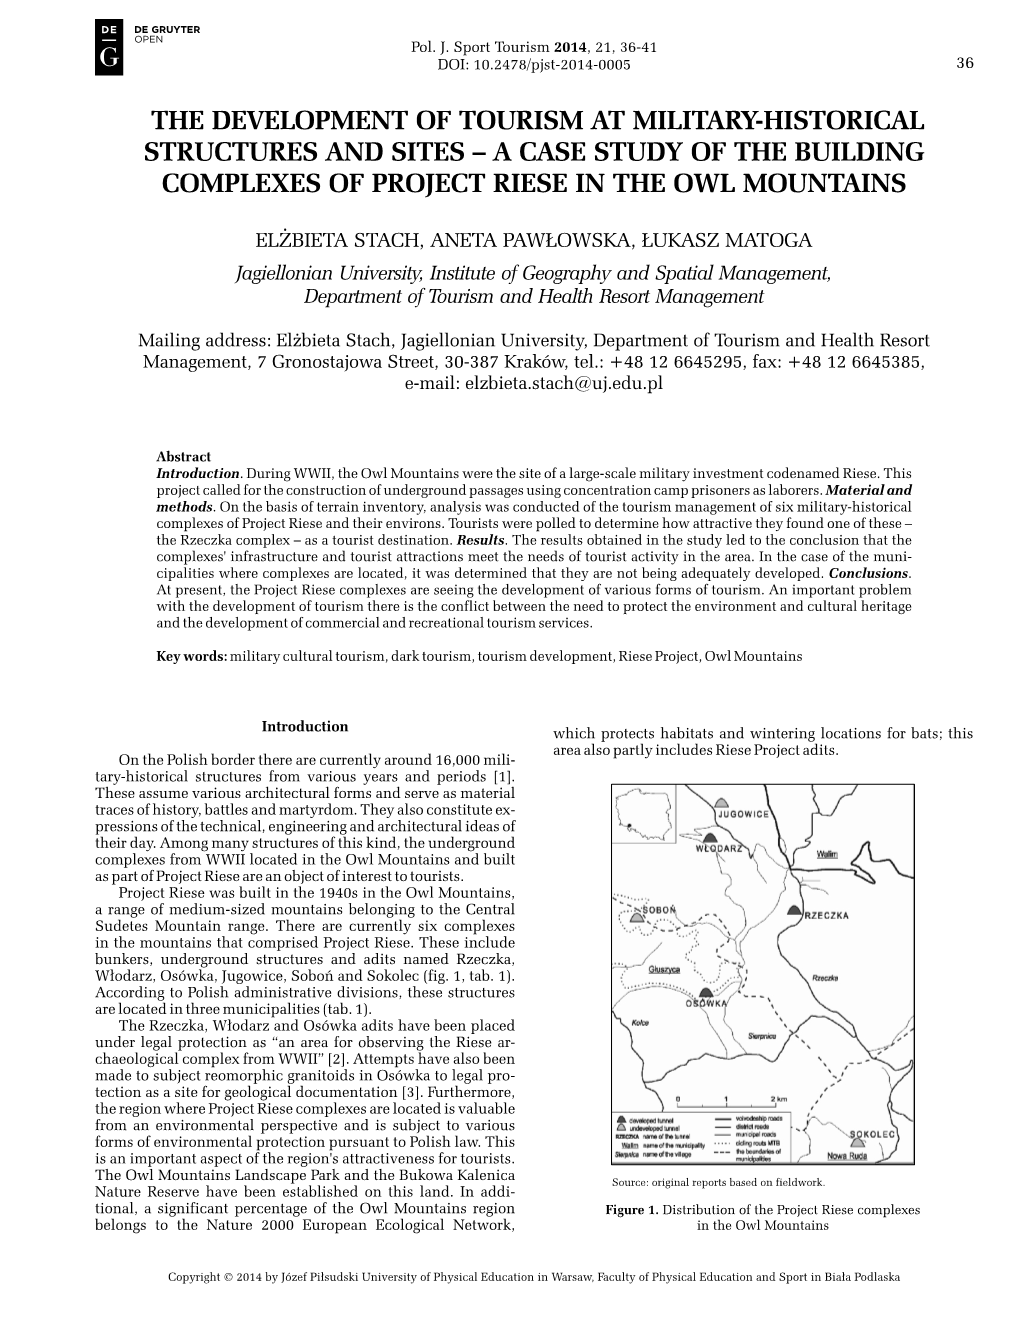 The Development of Tourism at Military-Historical Structures and Sites – a Case Study of the Building Complexes of Project Riese in the Owl Mountains